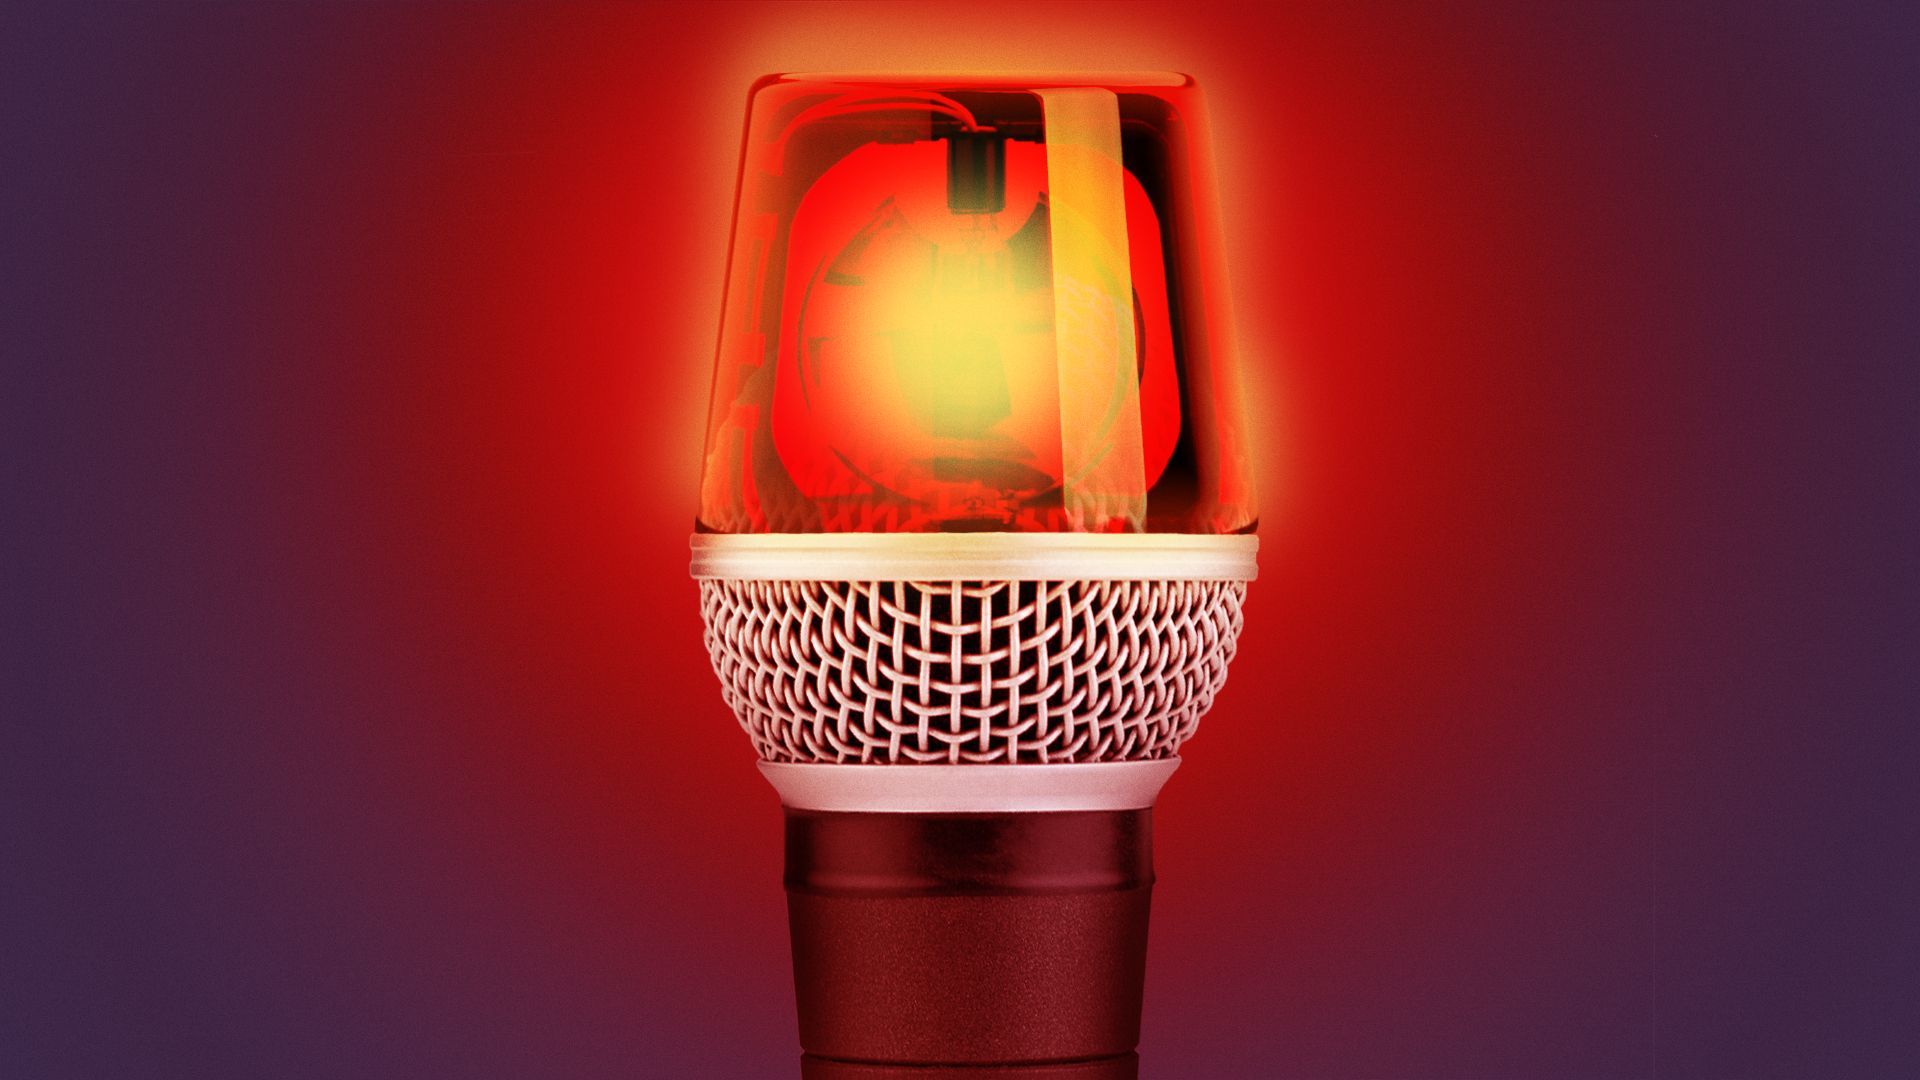 Illustration of a glowing siren on top of a microphone.